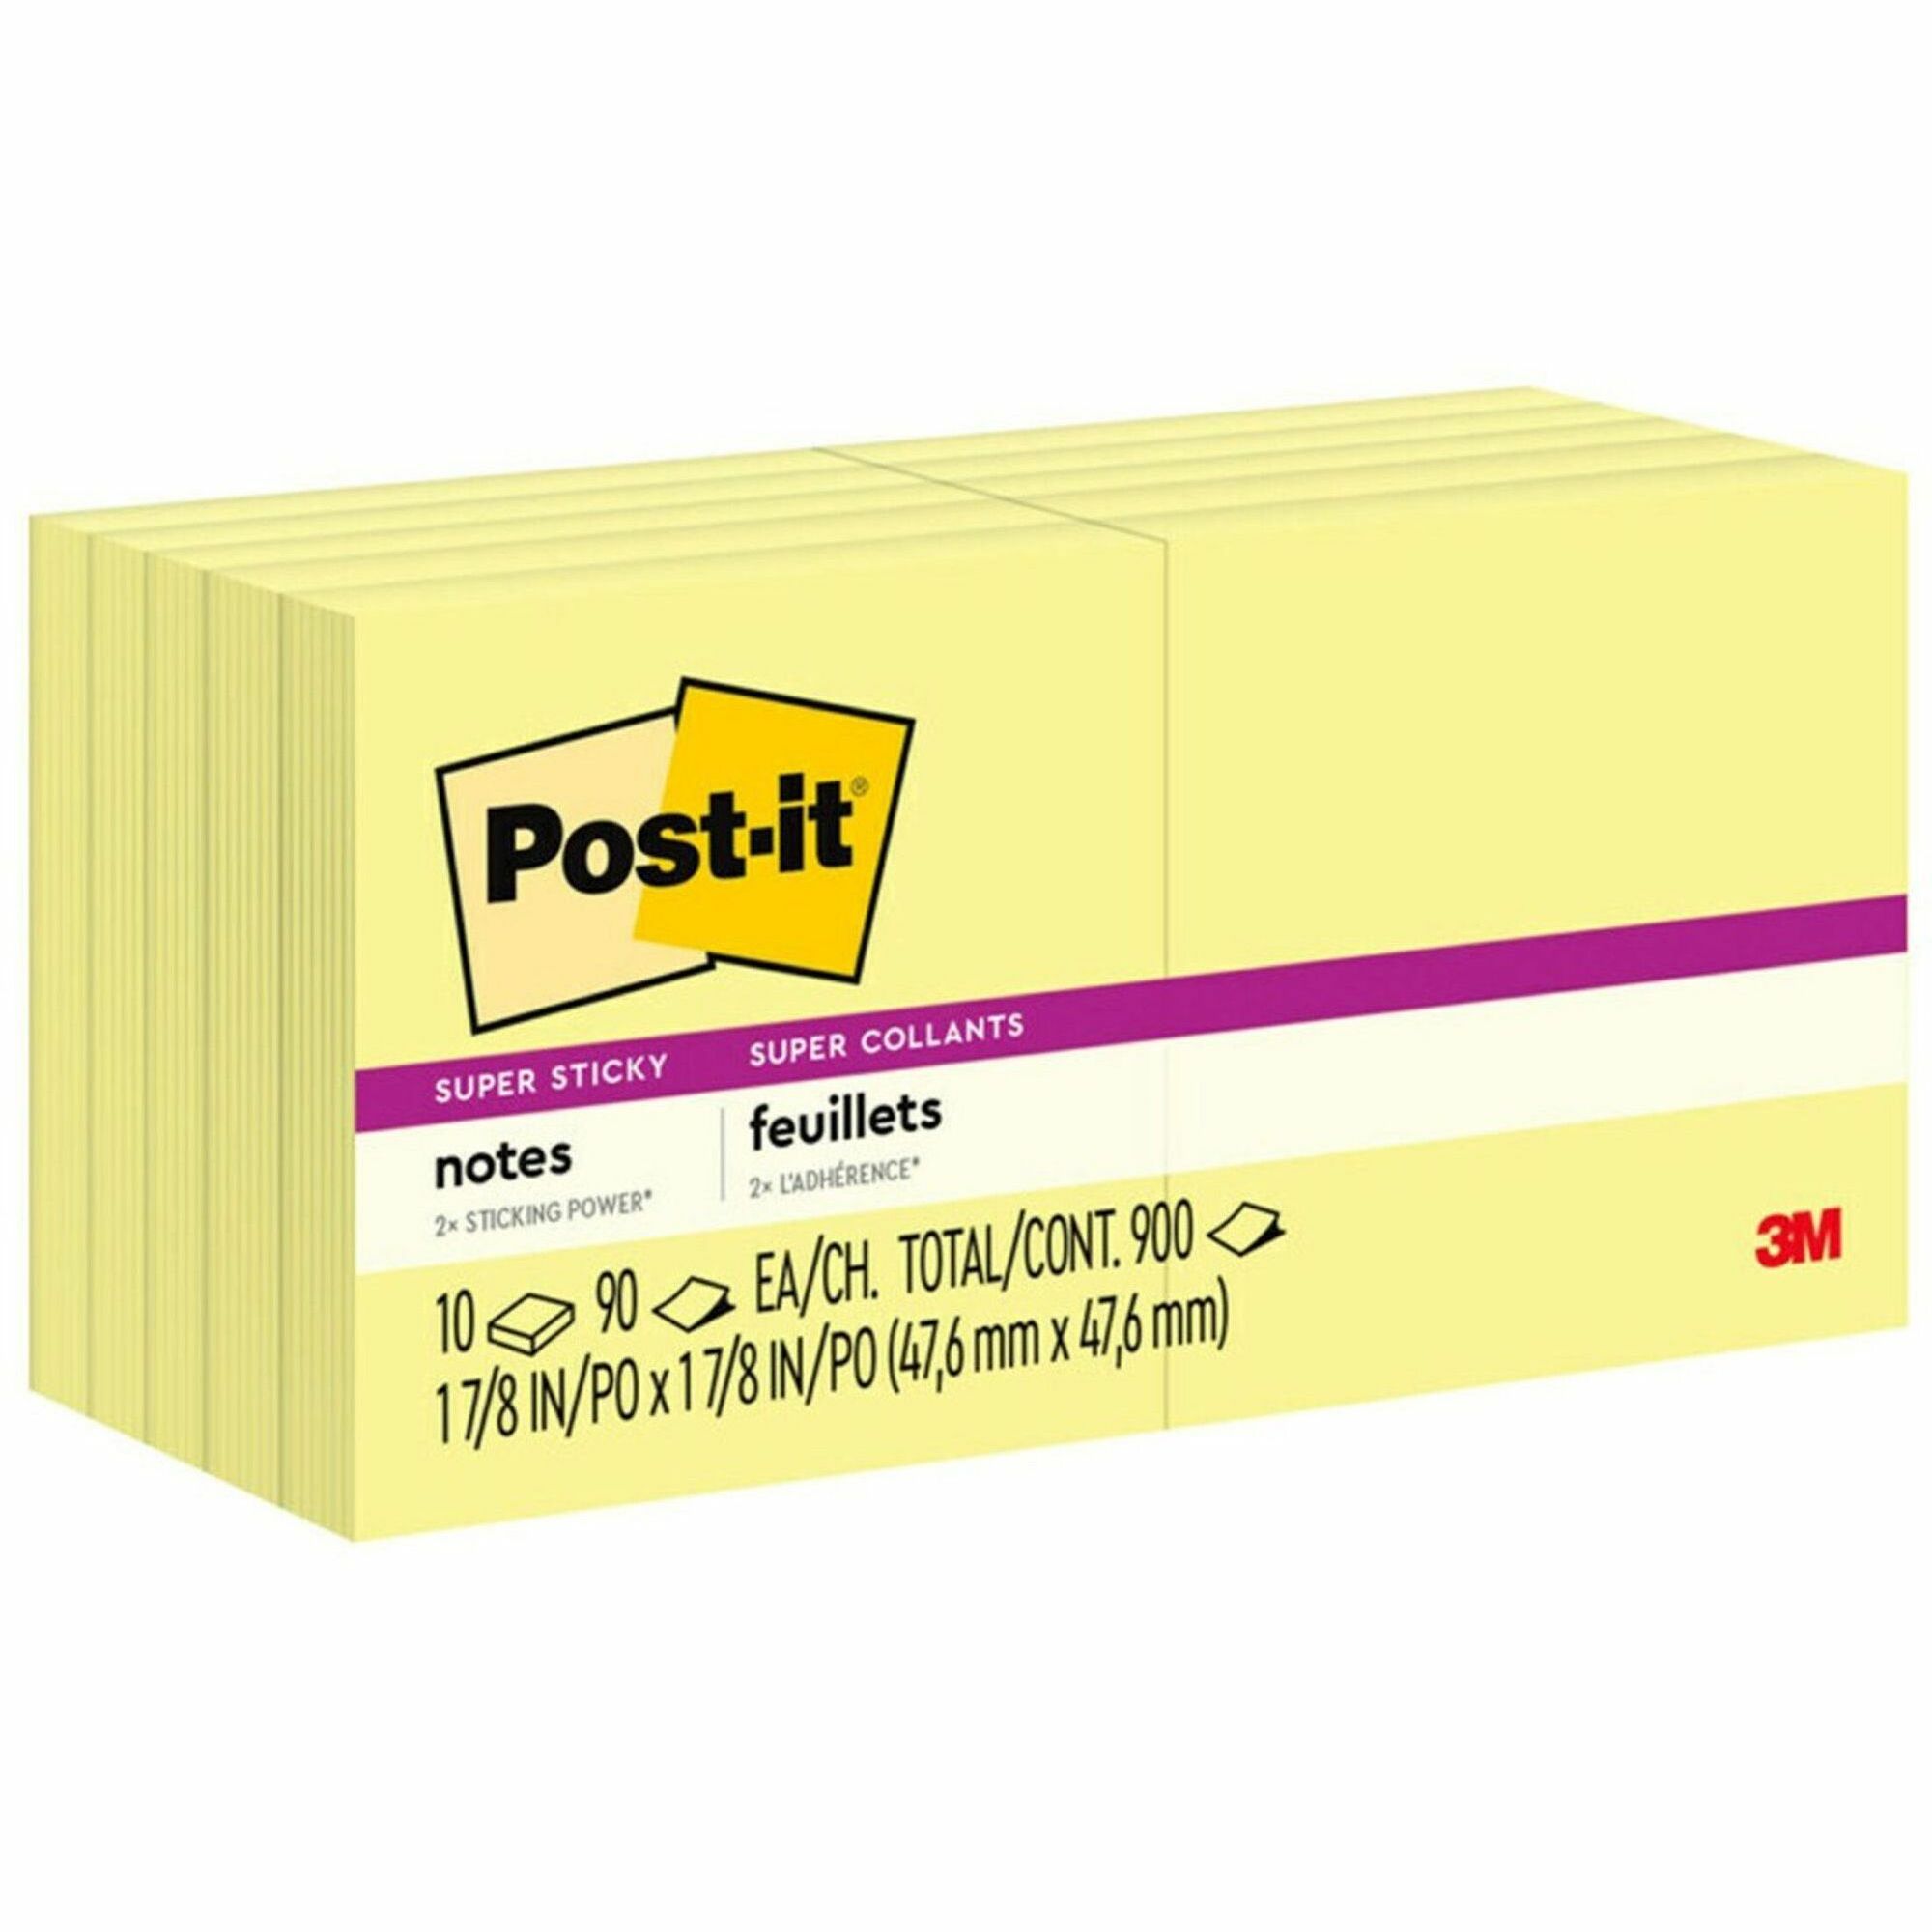 Post-it Super Sticky Notes, 4 x 6, Assorted Colors, Lined, 8 Pack, 800  Total Sheets